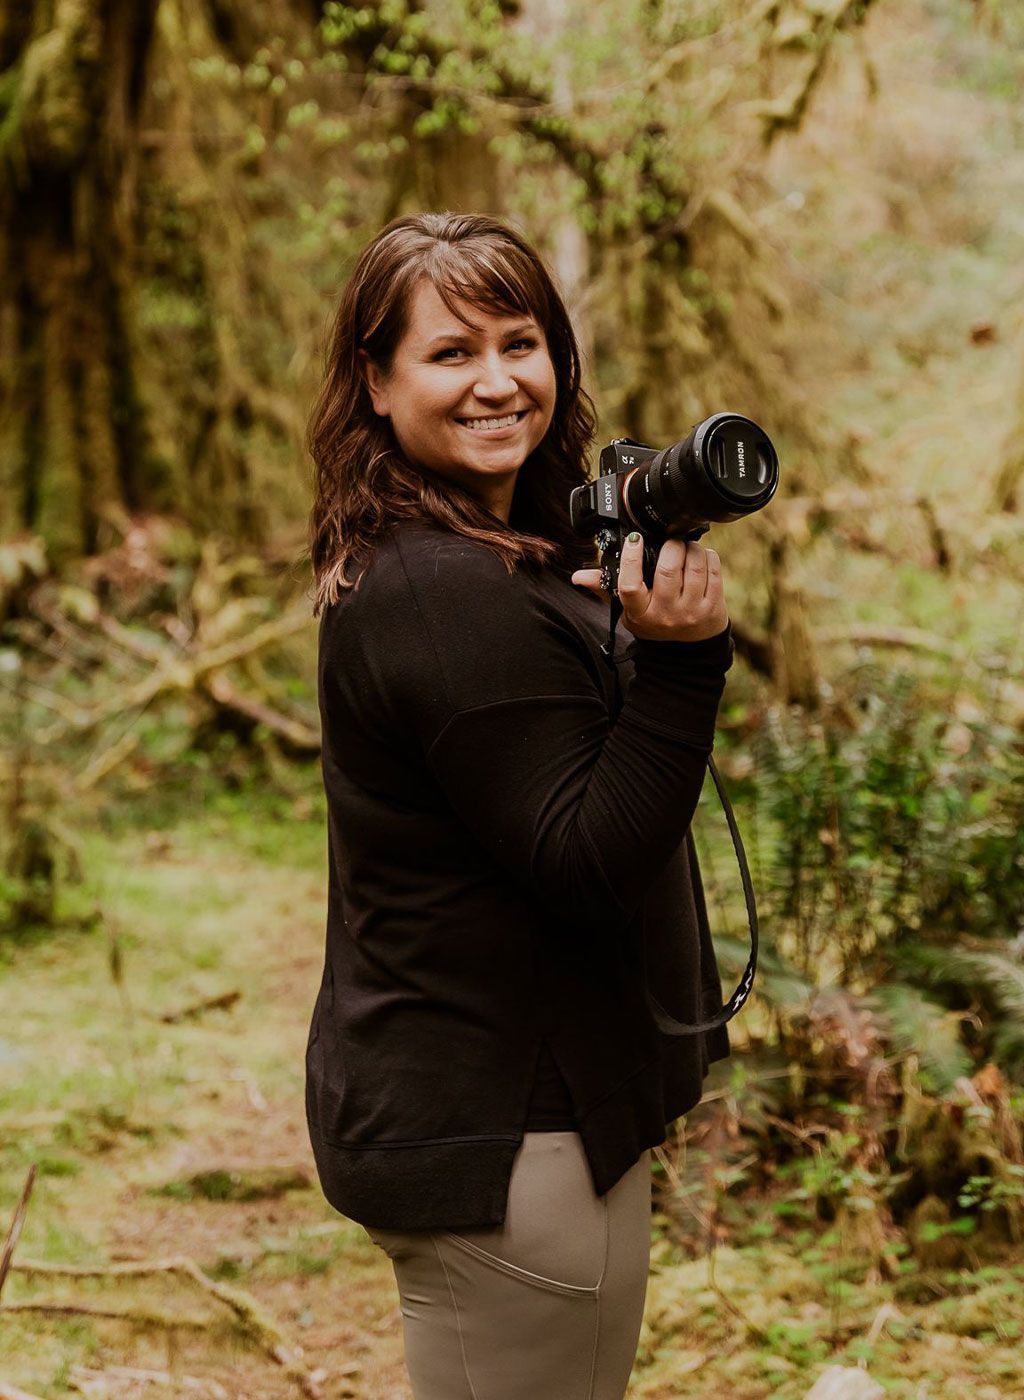 A woman is holding a camera in a forest.